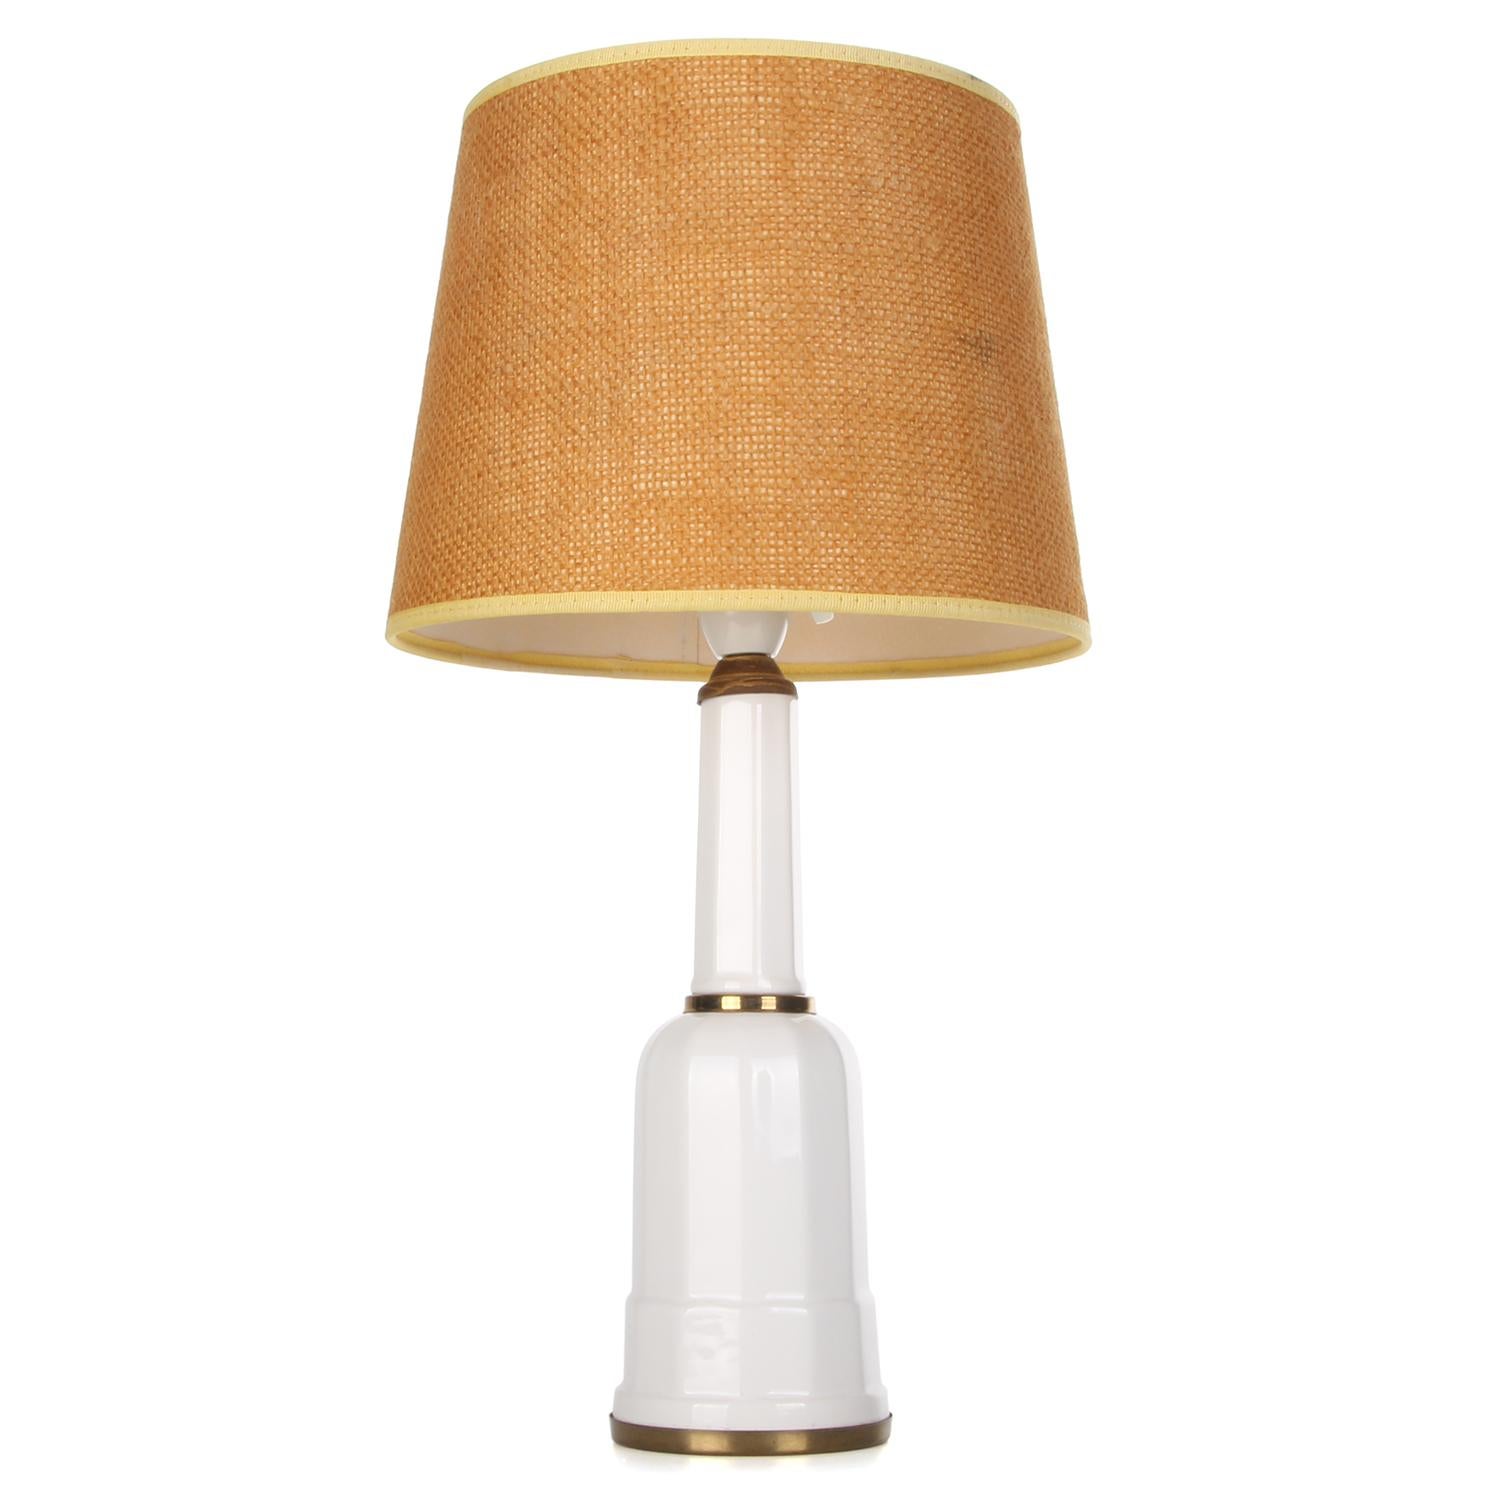 Mid-Century Modern HEIBERG TABLE LIGHT by Soholm in the 1960s - with vintage hessian shade included